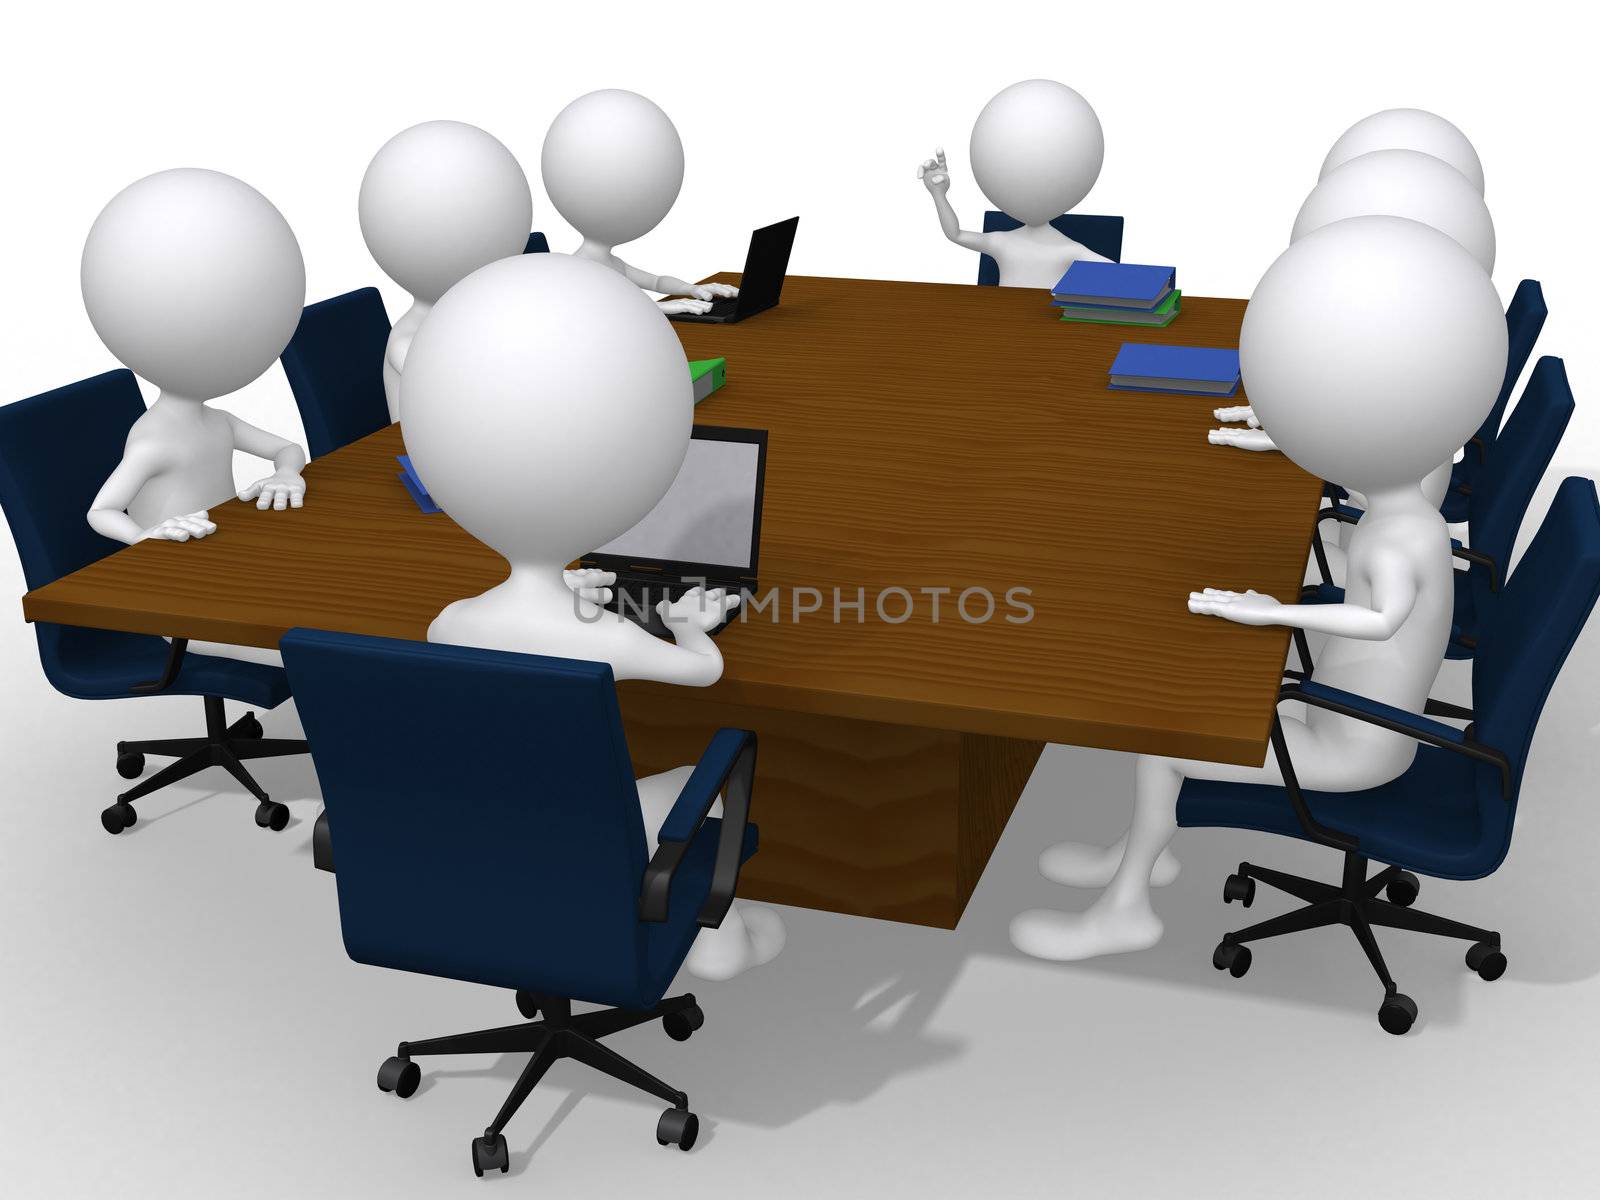 3d group discussion on a business meeting in a modern office by dacasdo